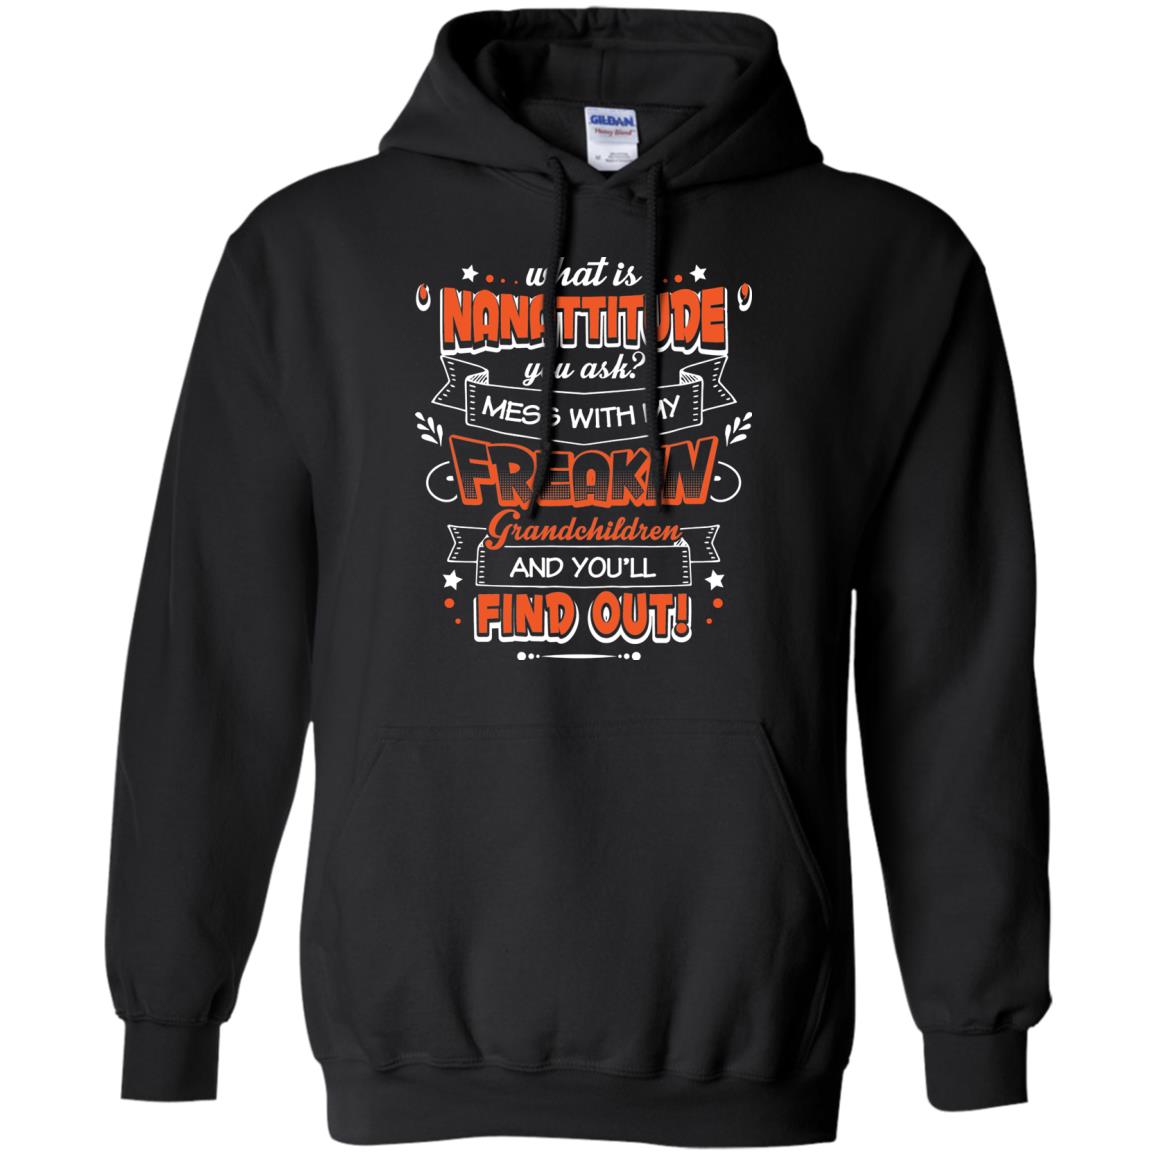 What Is Nanattitude You Ask Mess With My Grandchildren And You Will Find OutG185 Gildan Pullover Hoodie 8 oz.